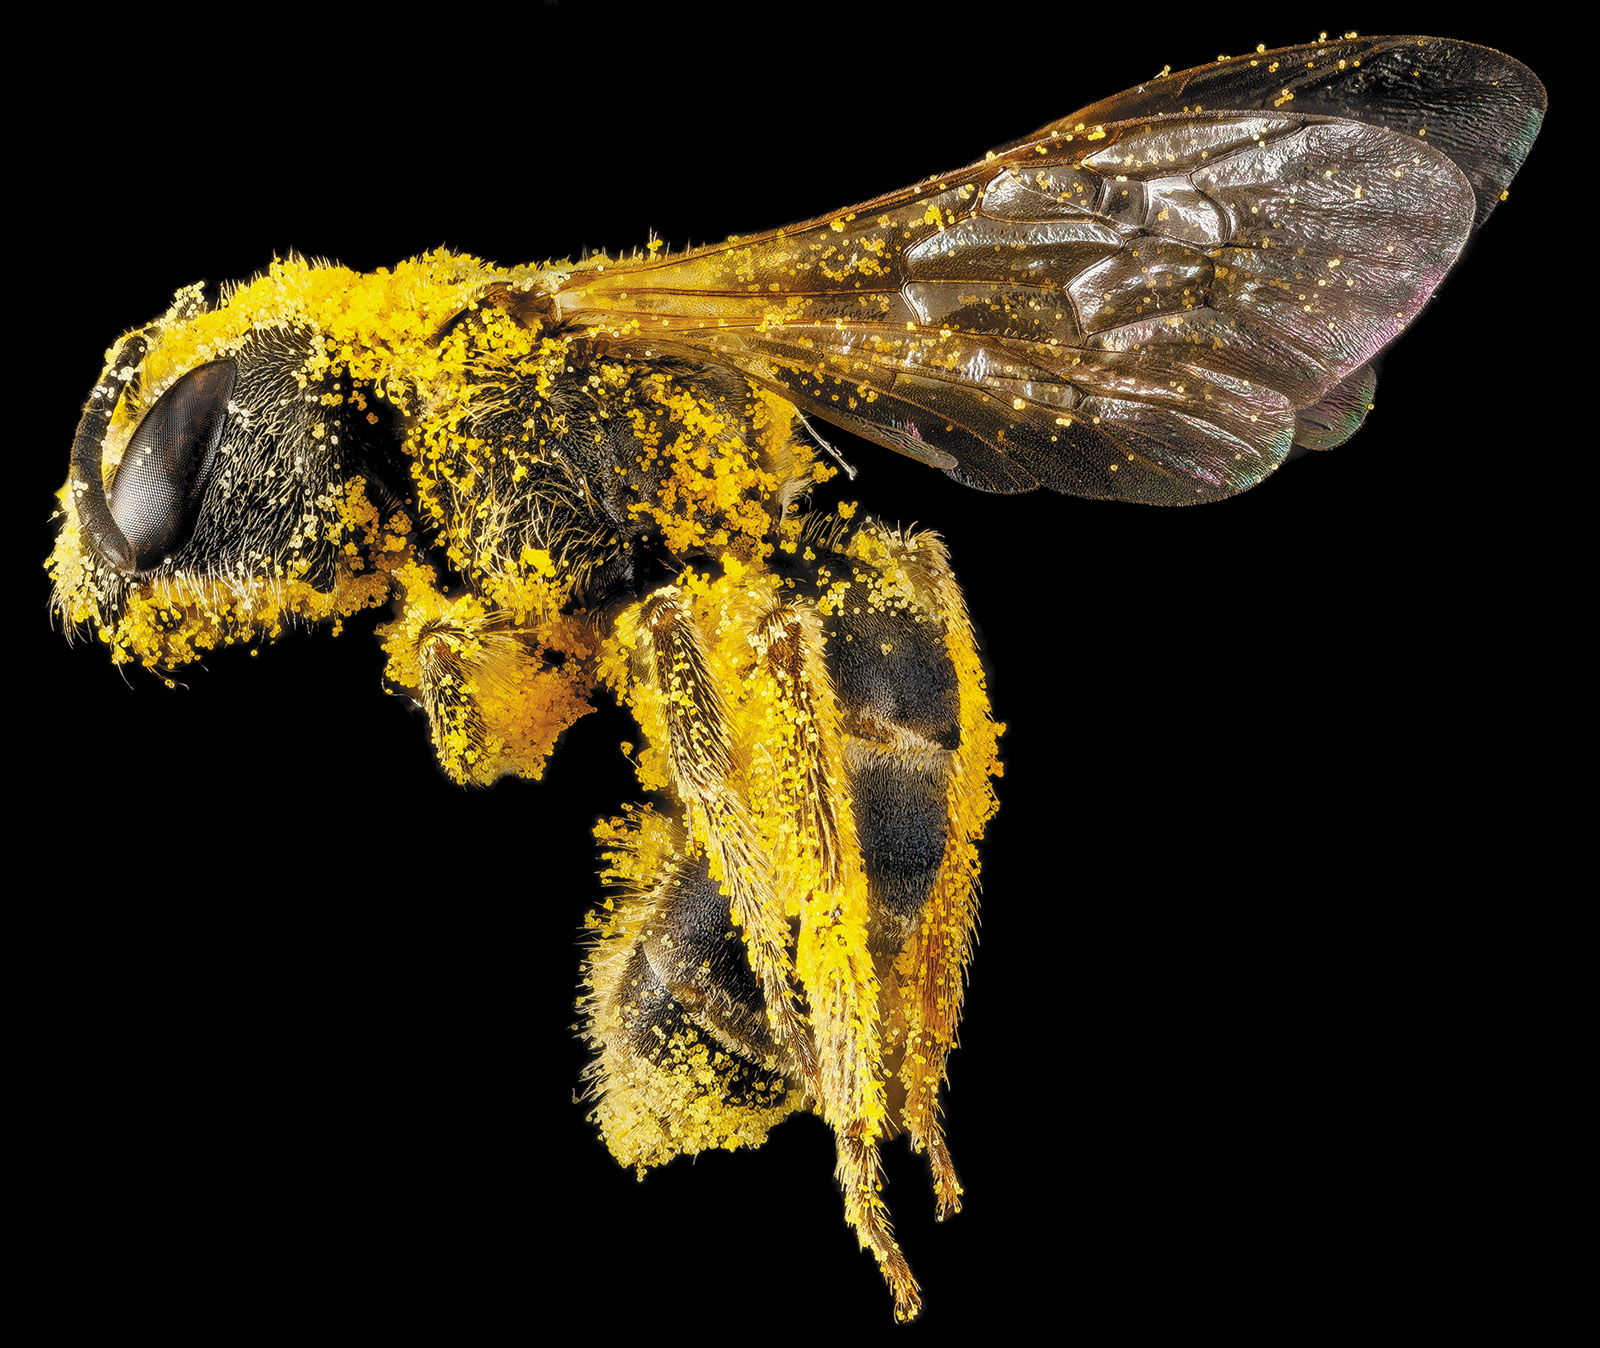 A sweat bee (Halictus ligatus) coated with pollen, 2013; digital composite photograph from the USGS Bee Inventory and Monitoring Lab’s catalog of native bees. It appears in the book Animal: Exploring the Zoological World, just published by Phaidon.